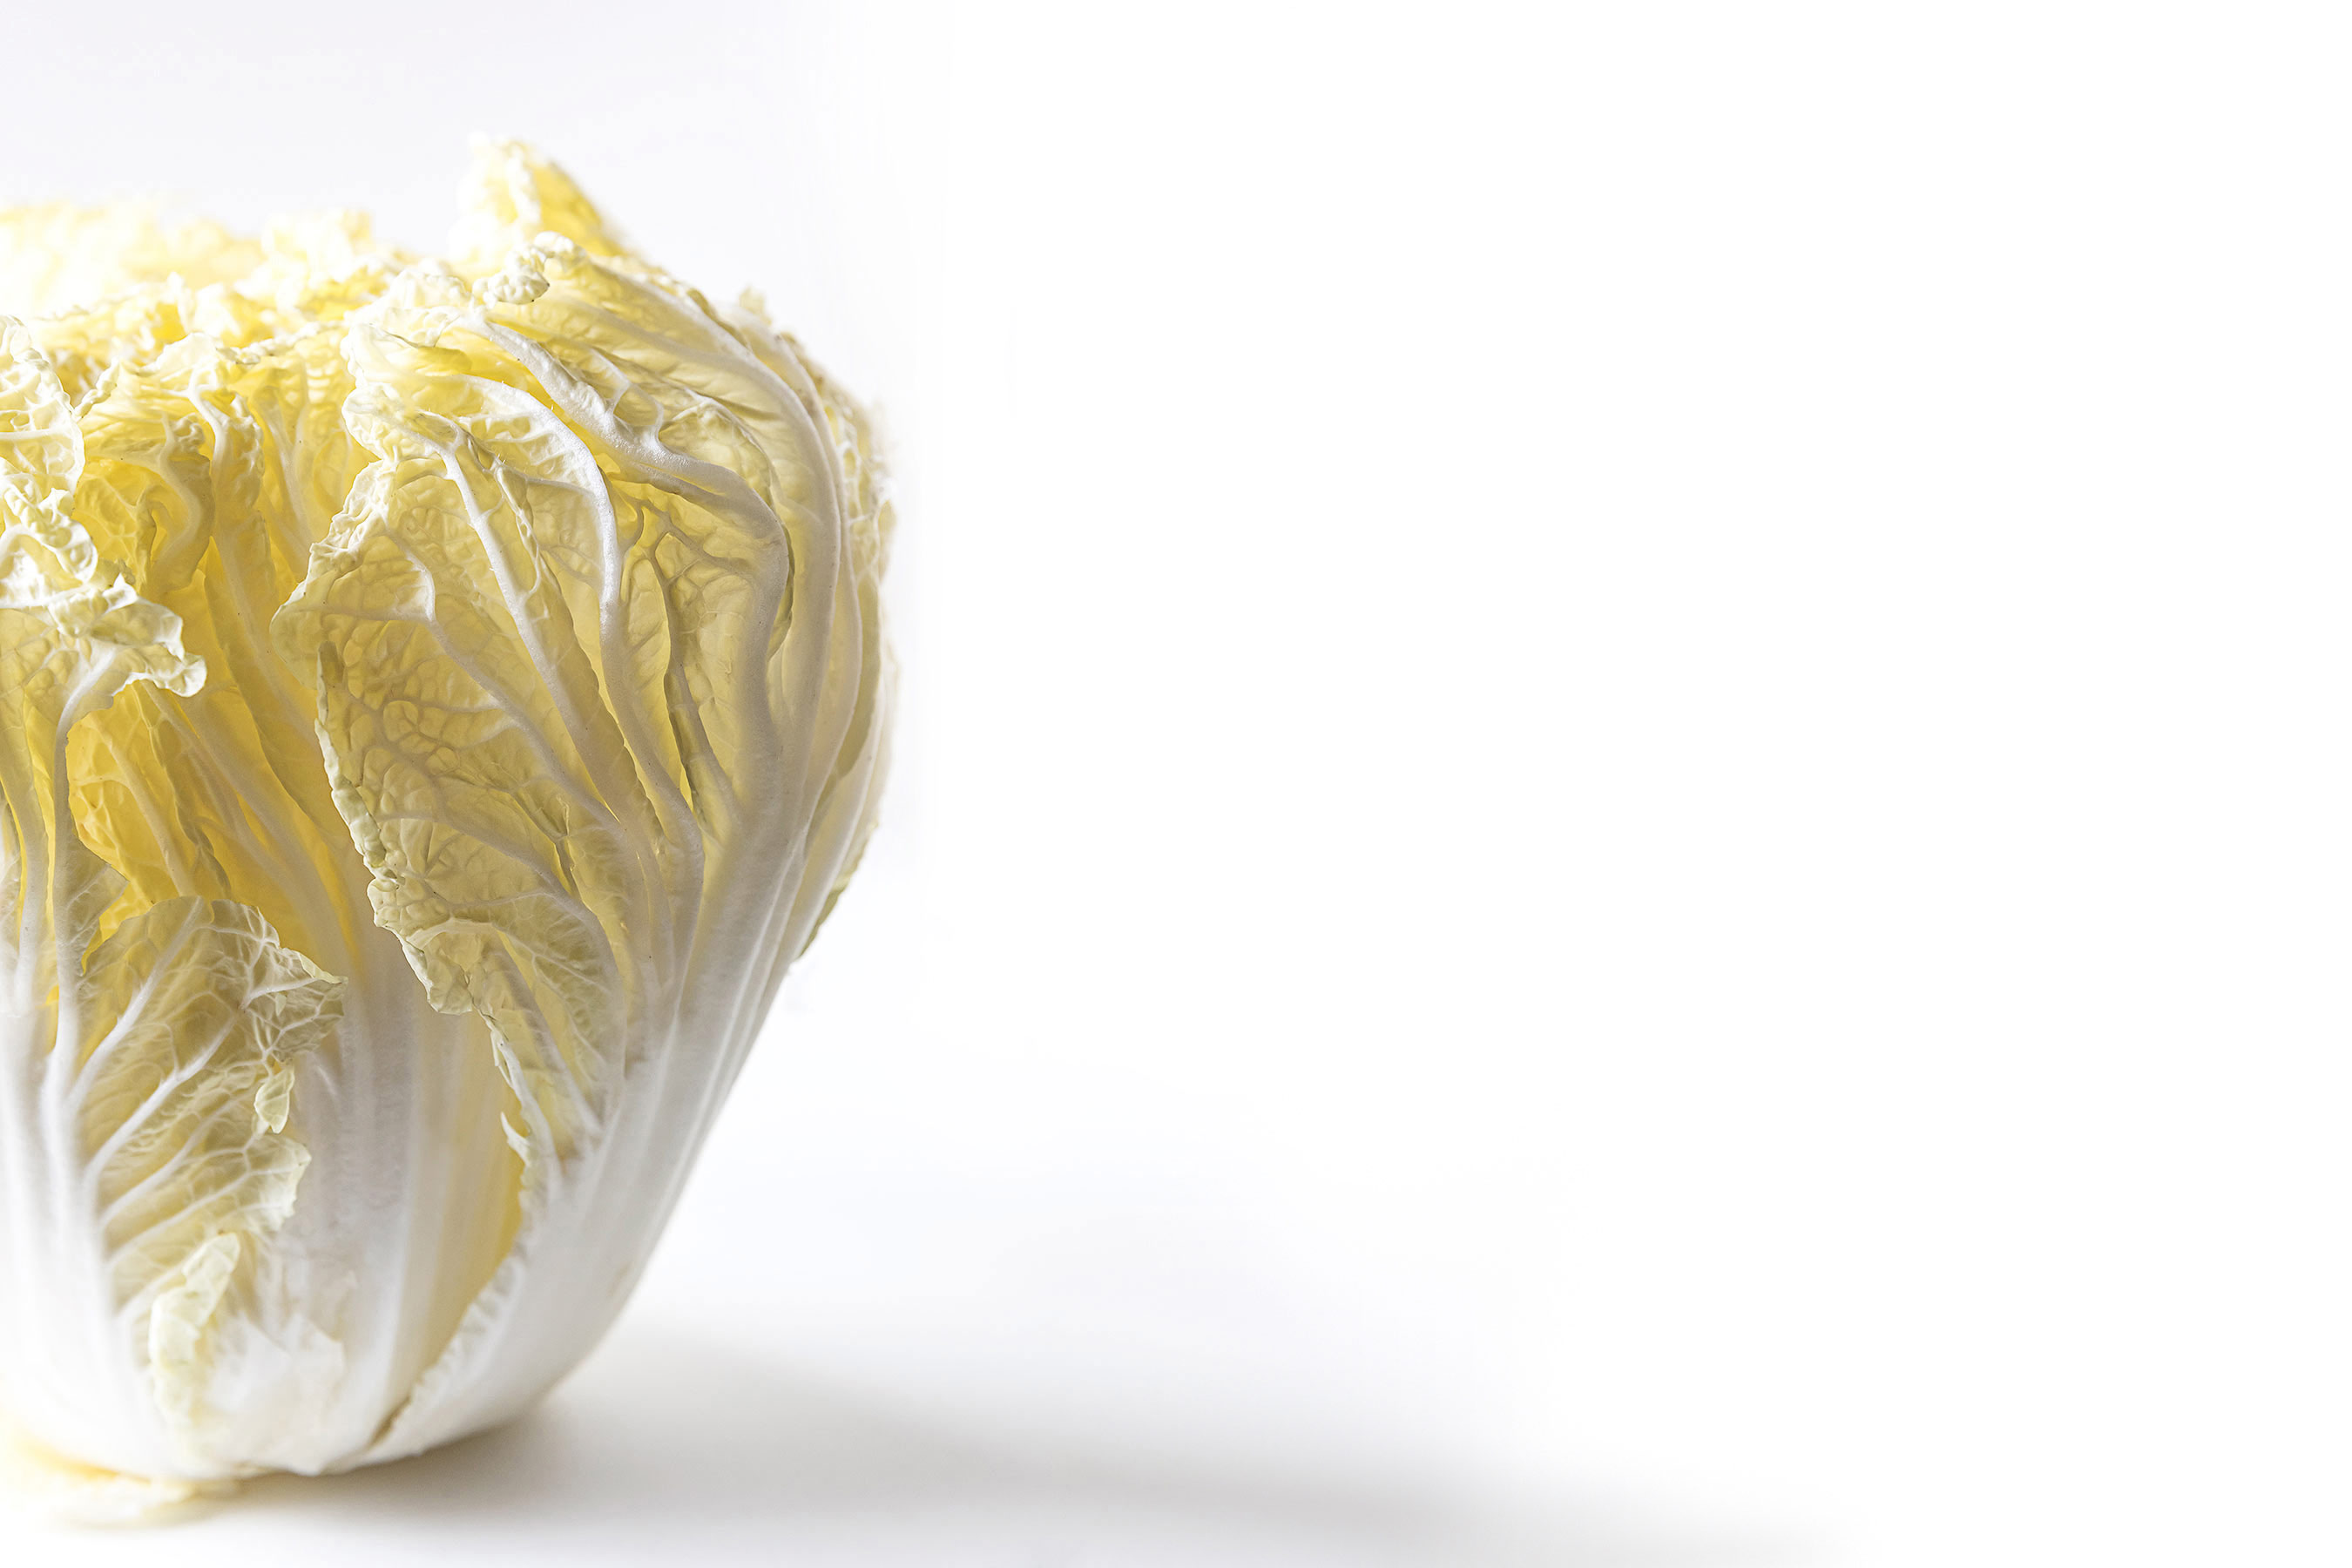 white cabbage on white surface with backlight